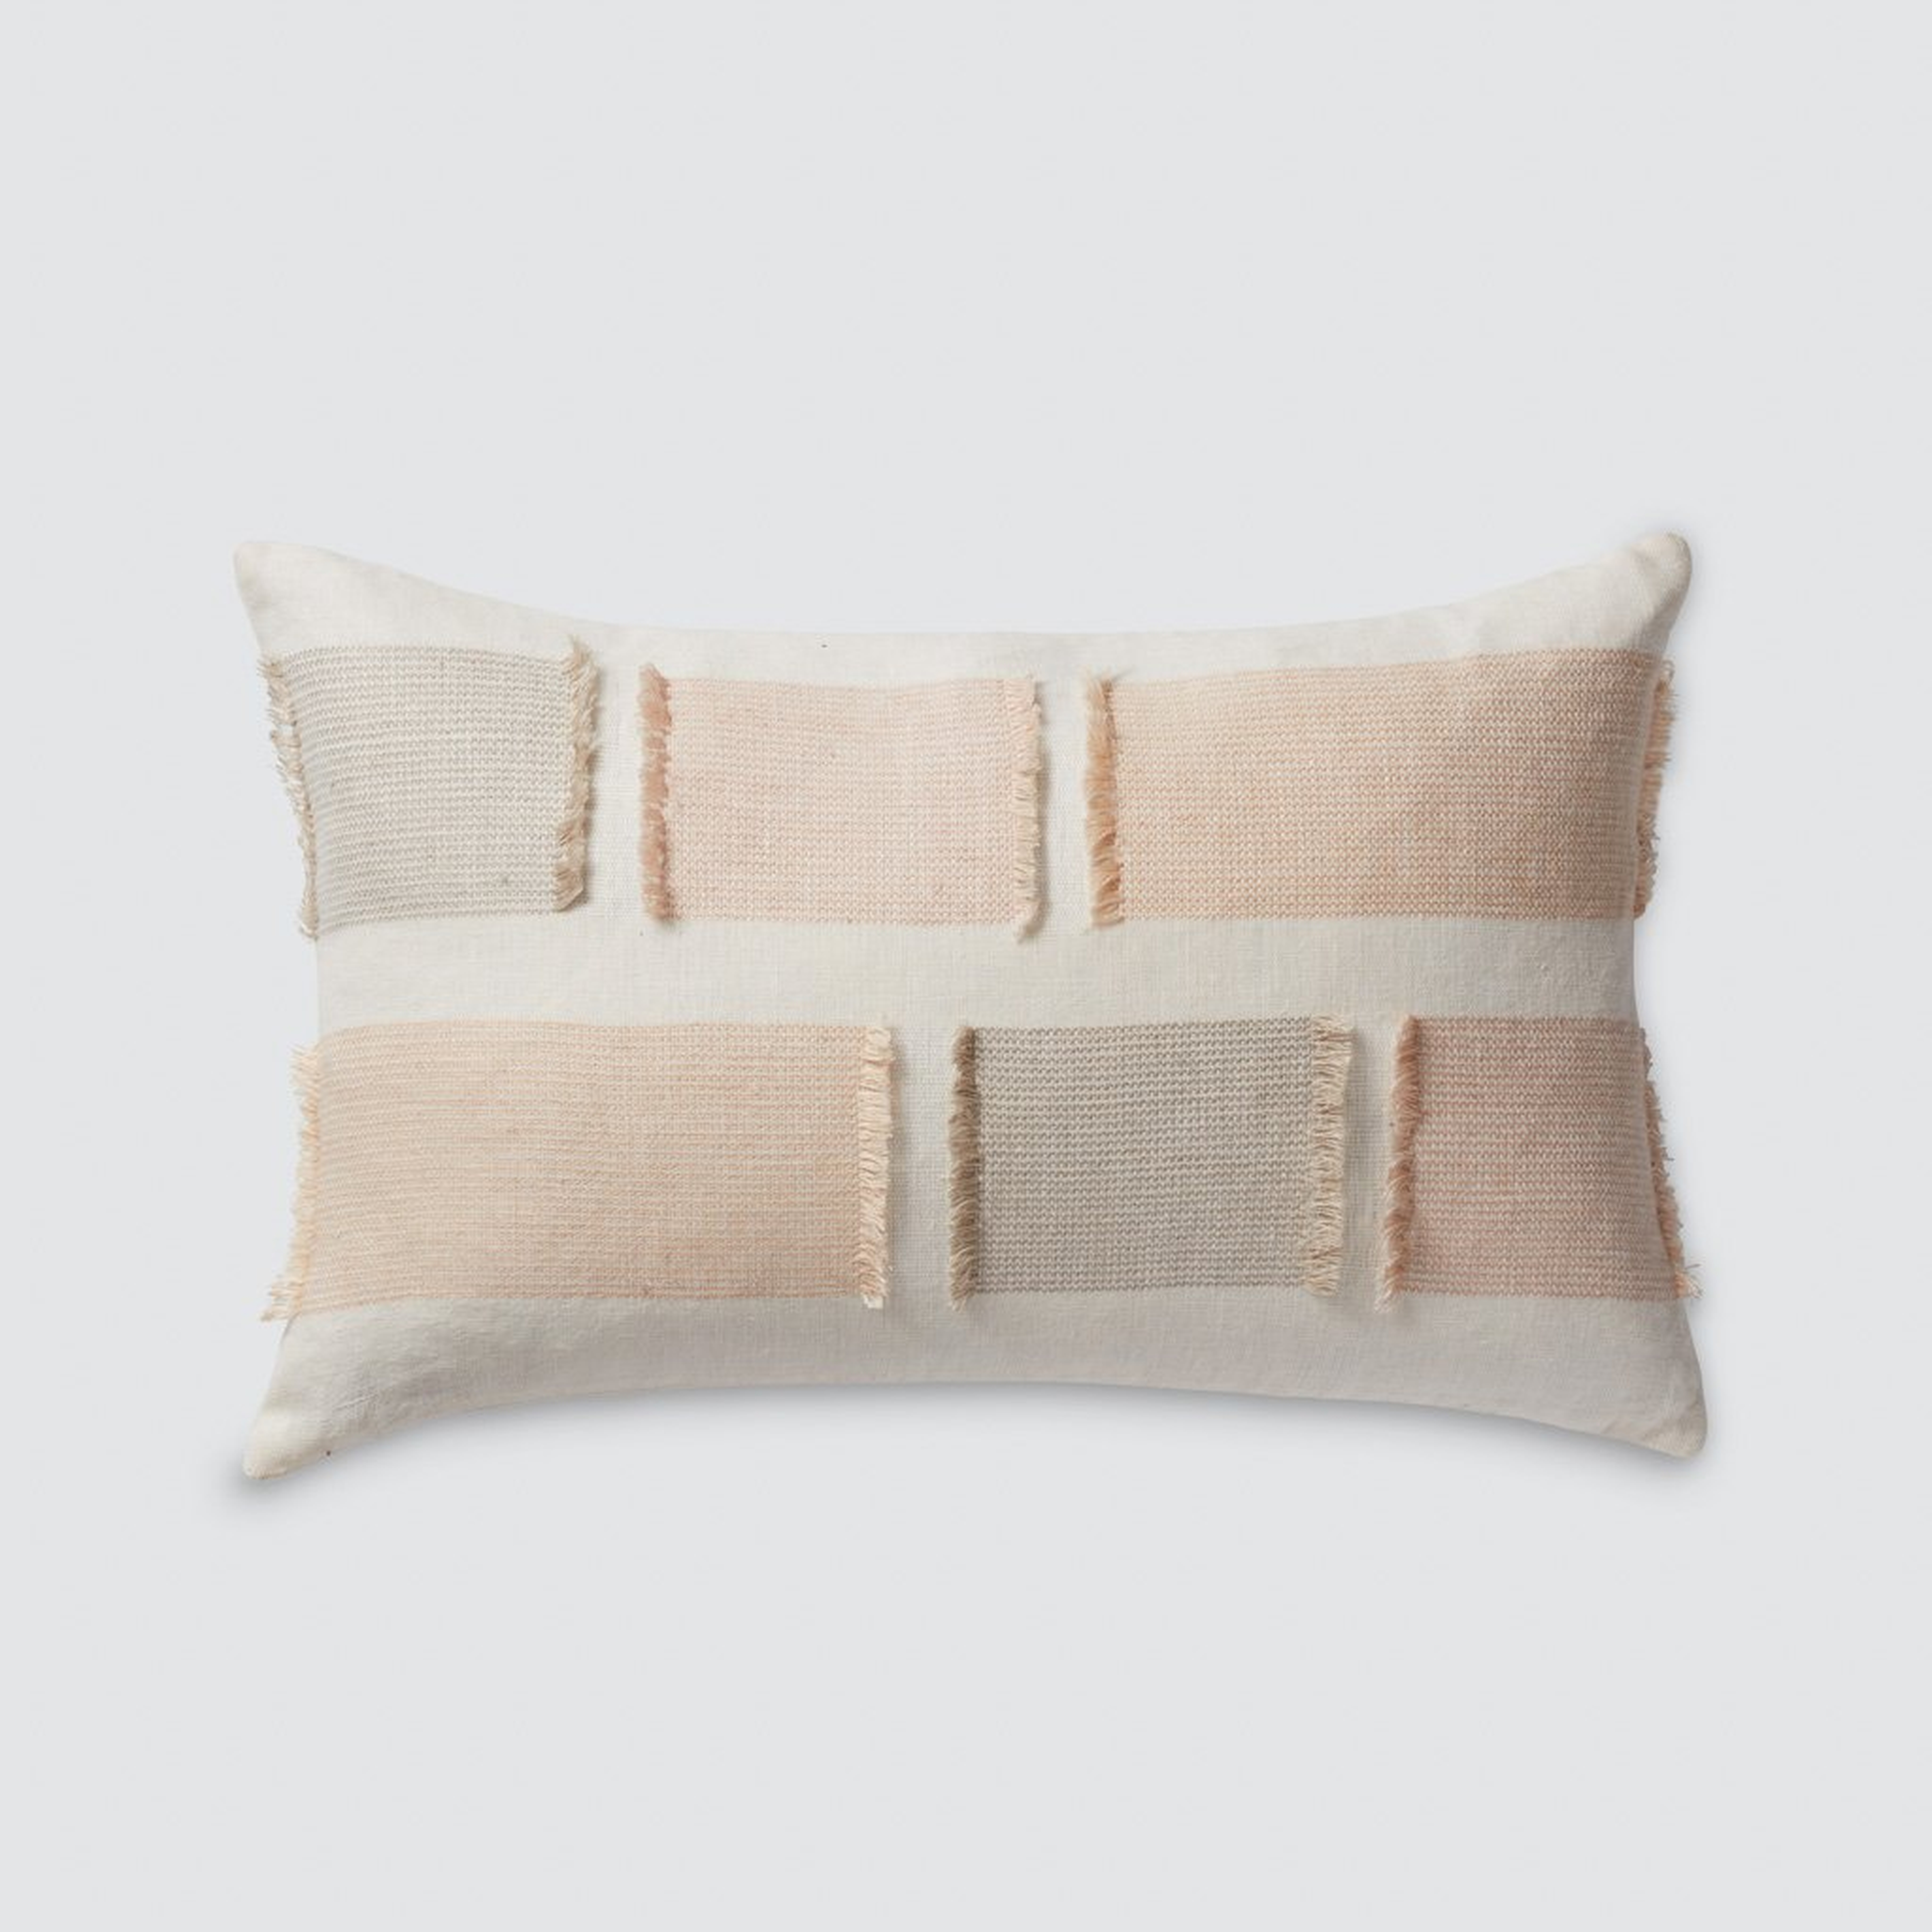 Zara Lumbar Pillow By The Citizenry - The Citizenry